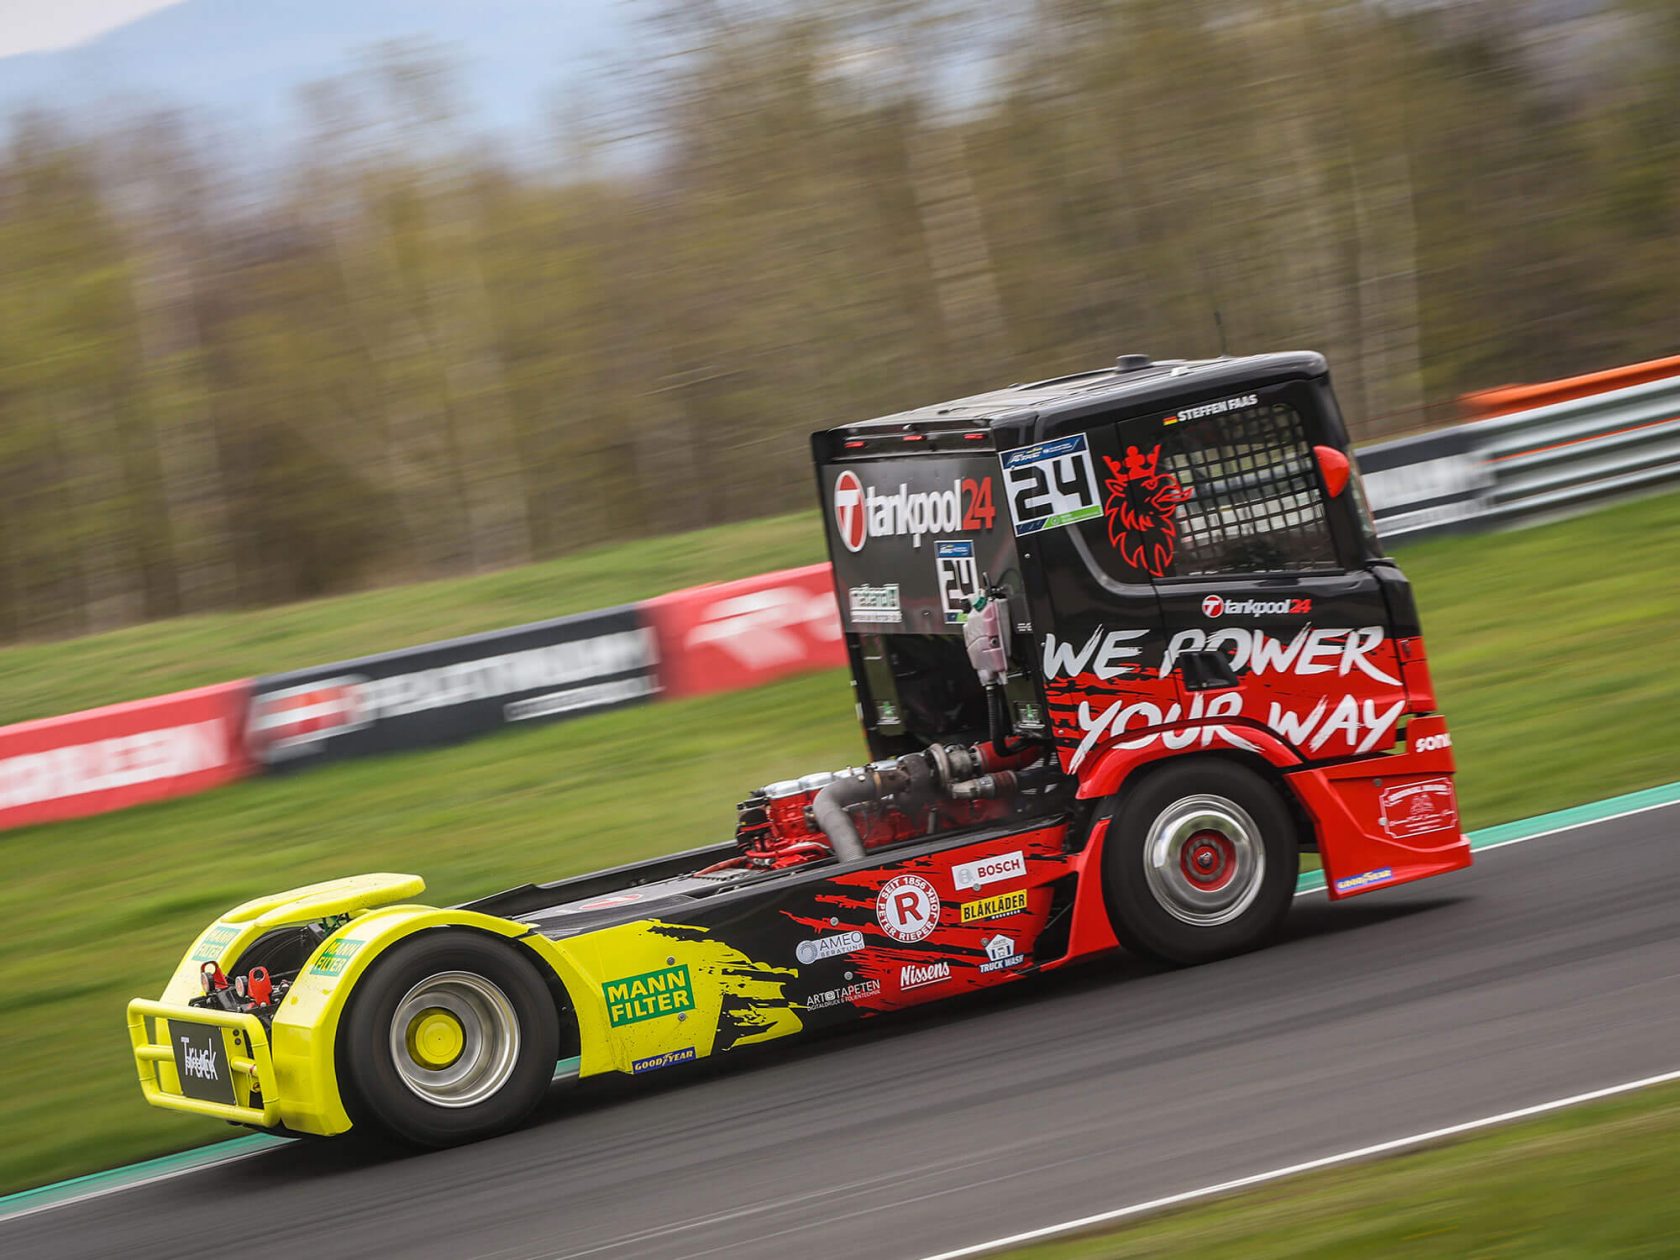 MANN-FILTER racing truck in action on the race track